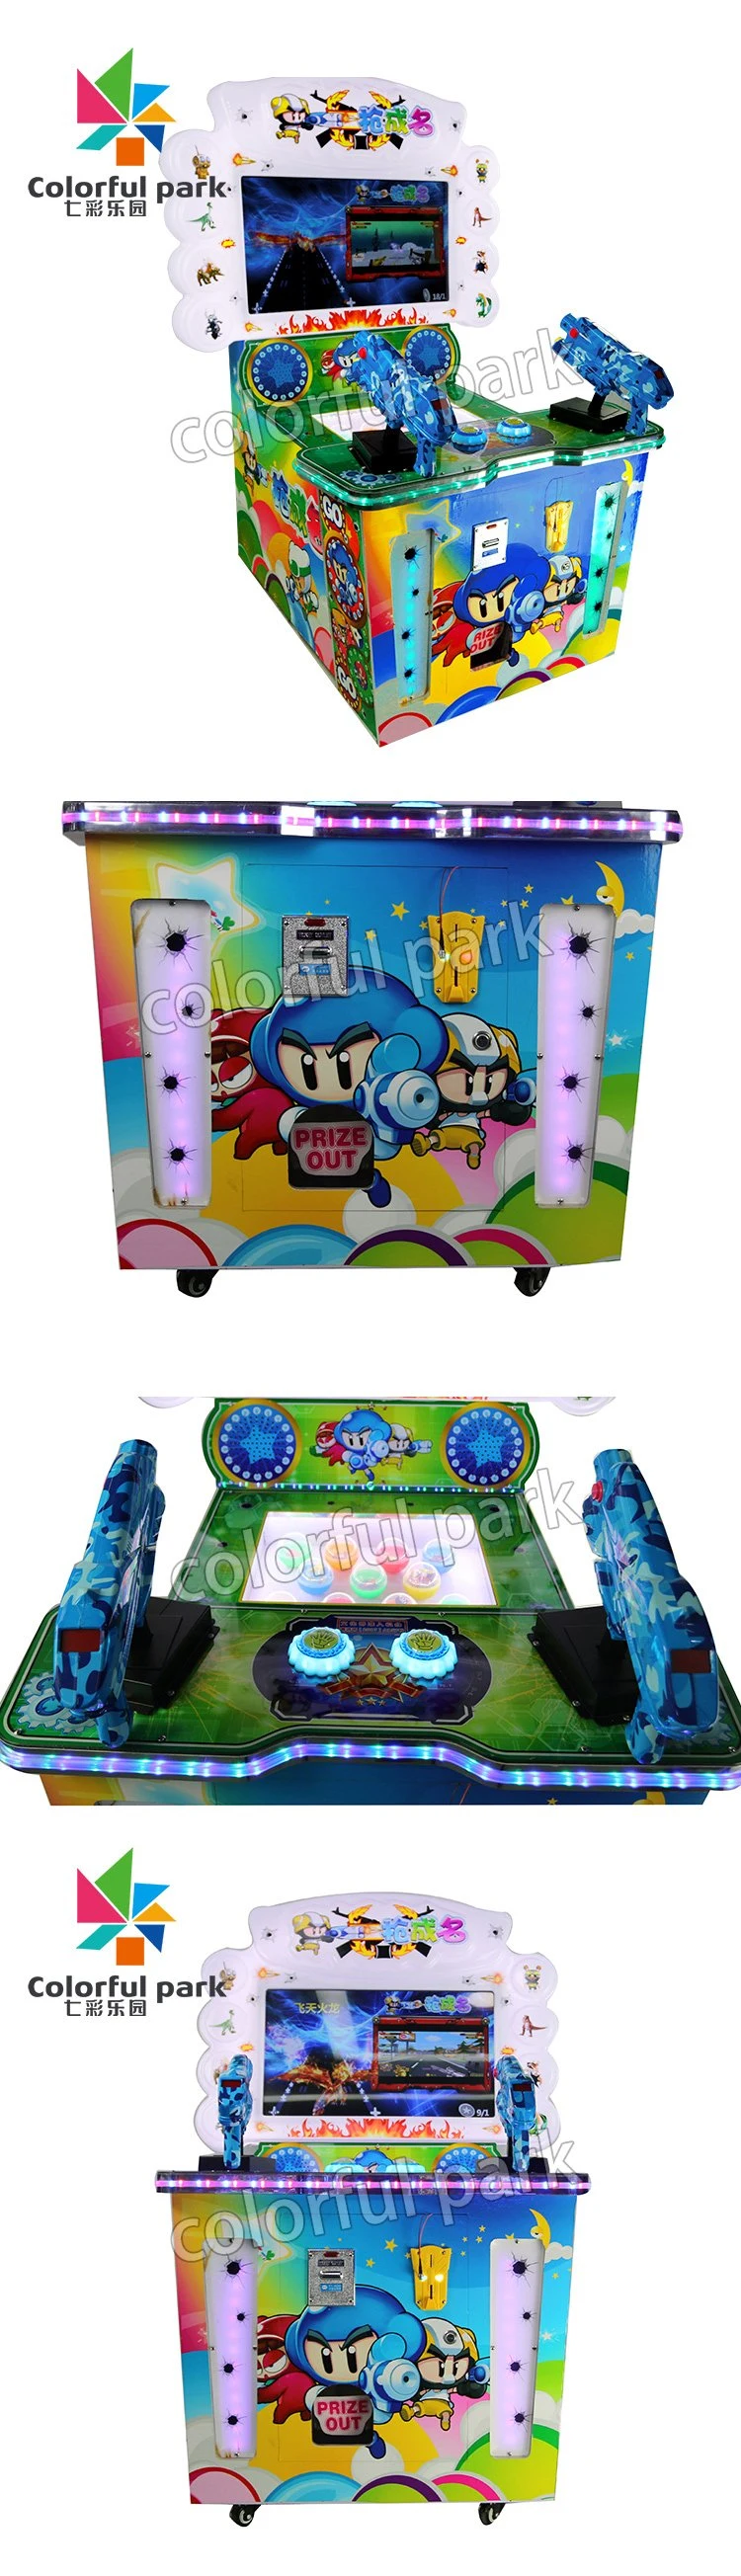 Colorful Park Video Gun Shooting Coin Operated Arcade Redemption Gun Game Shooting Machine